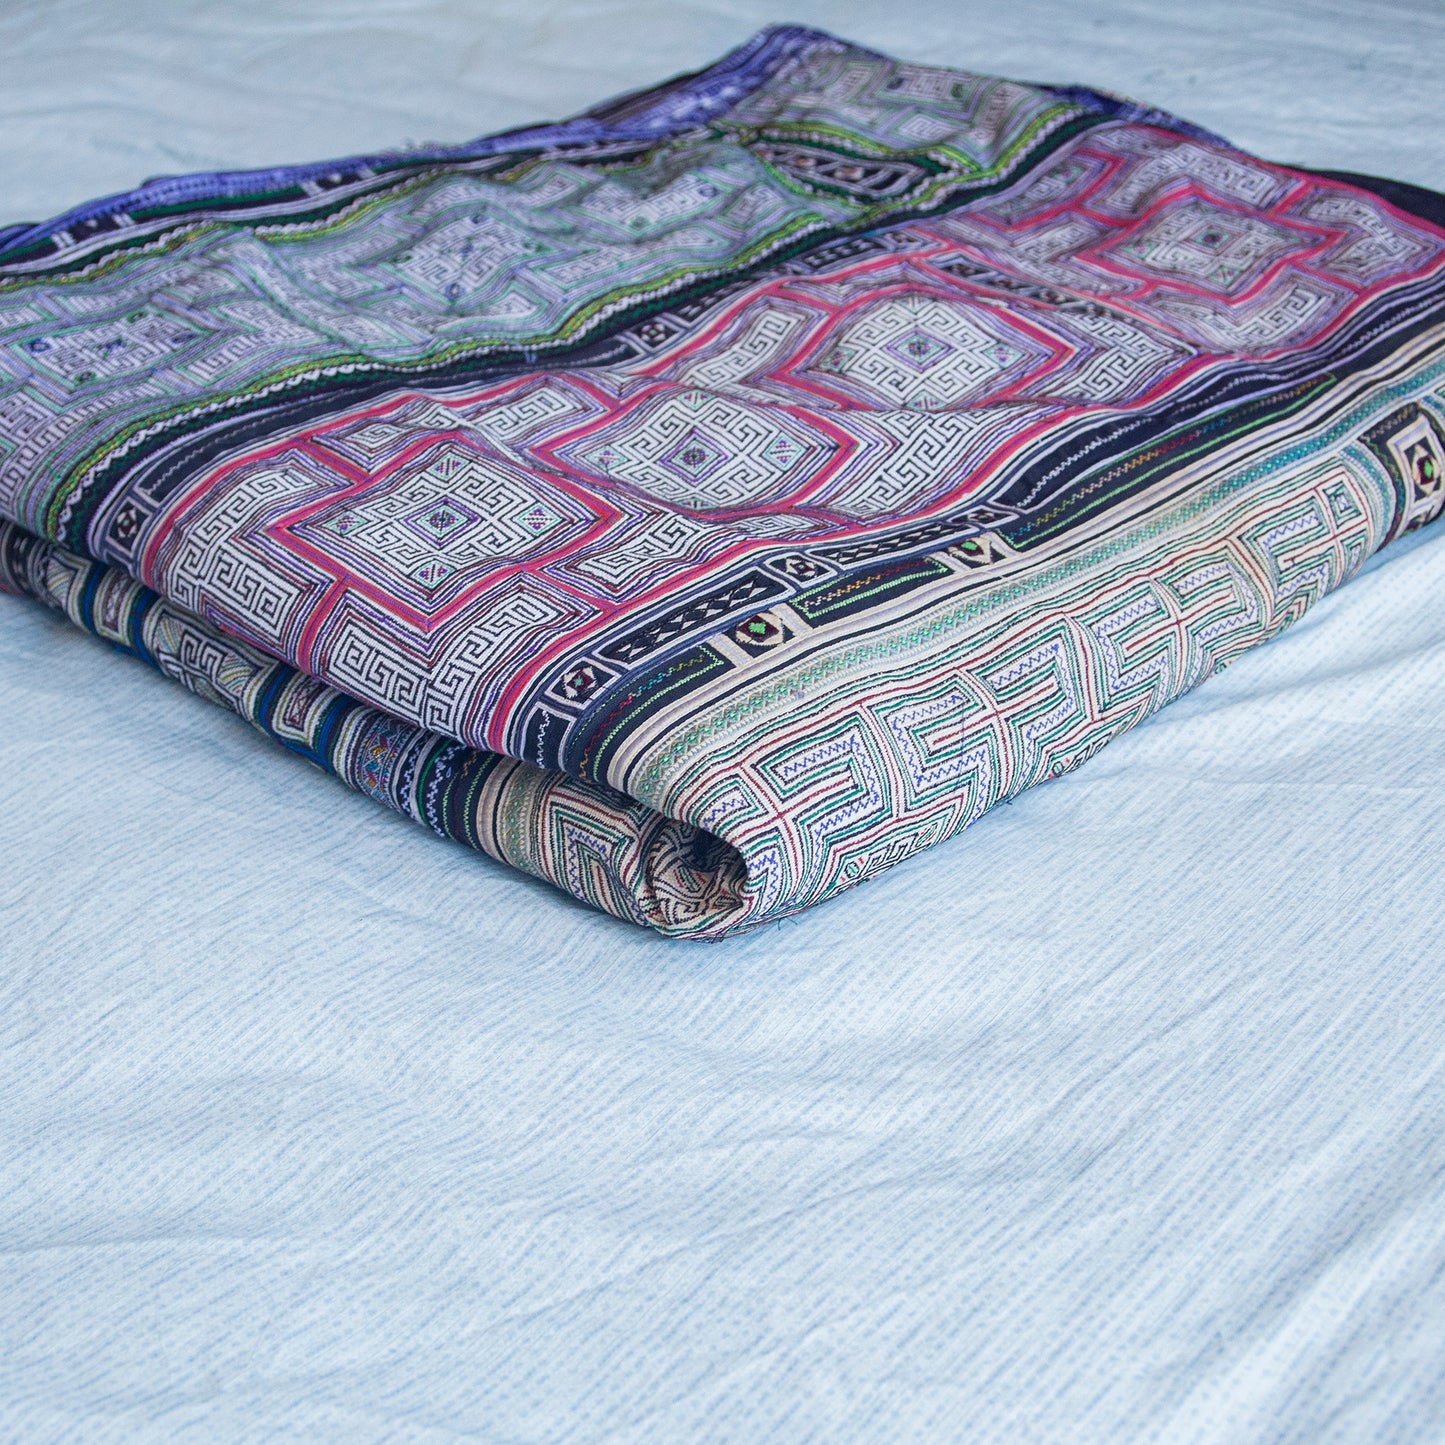 Beautiful H'mong fabric, dual-sized bed cover for king and queen sized beds